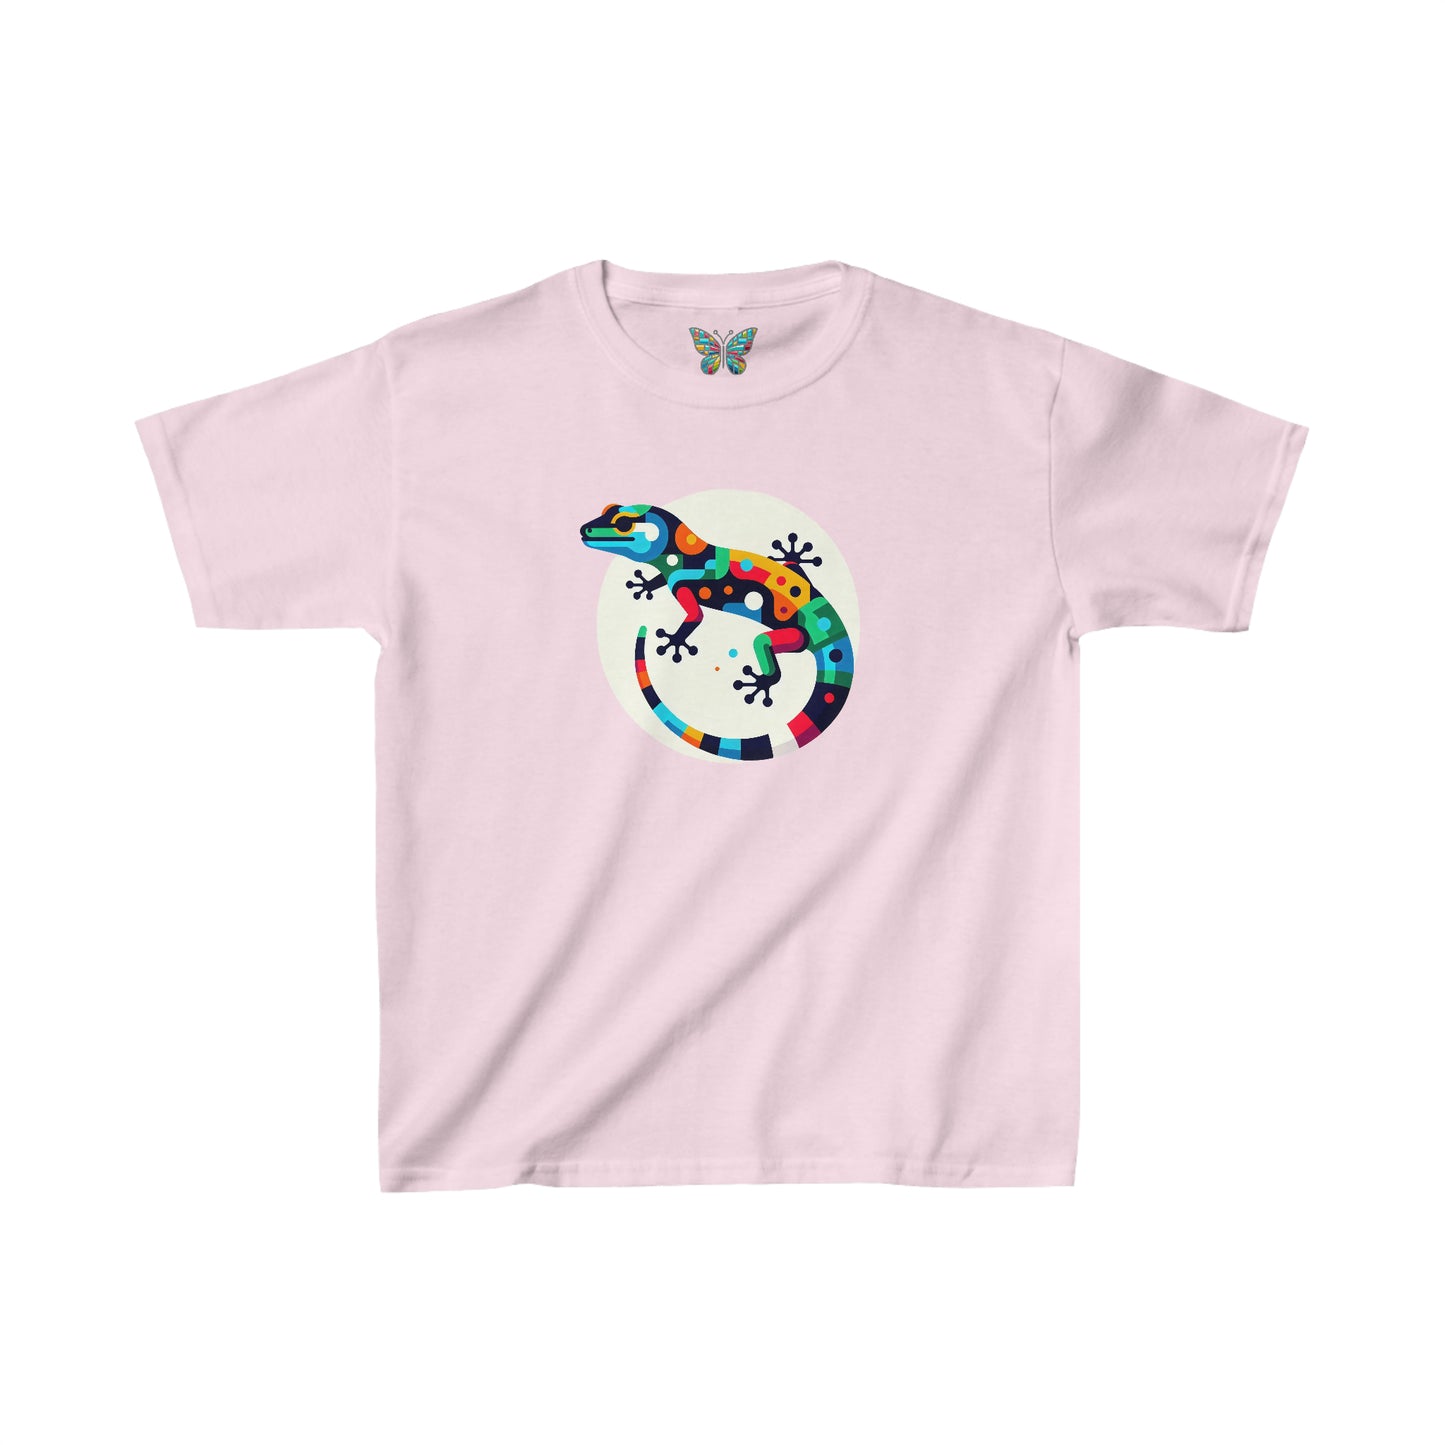 Leopard Gecko Blissundream - Youth - Snazzle Tee